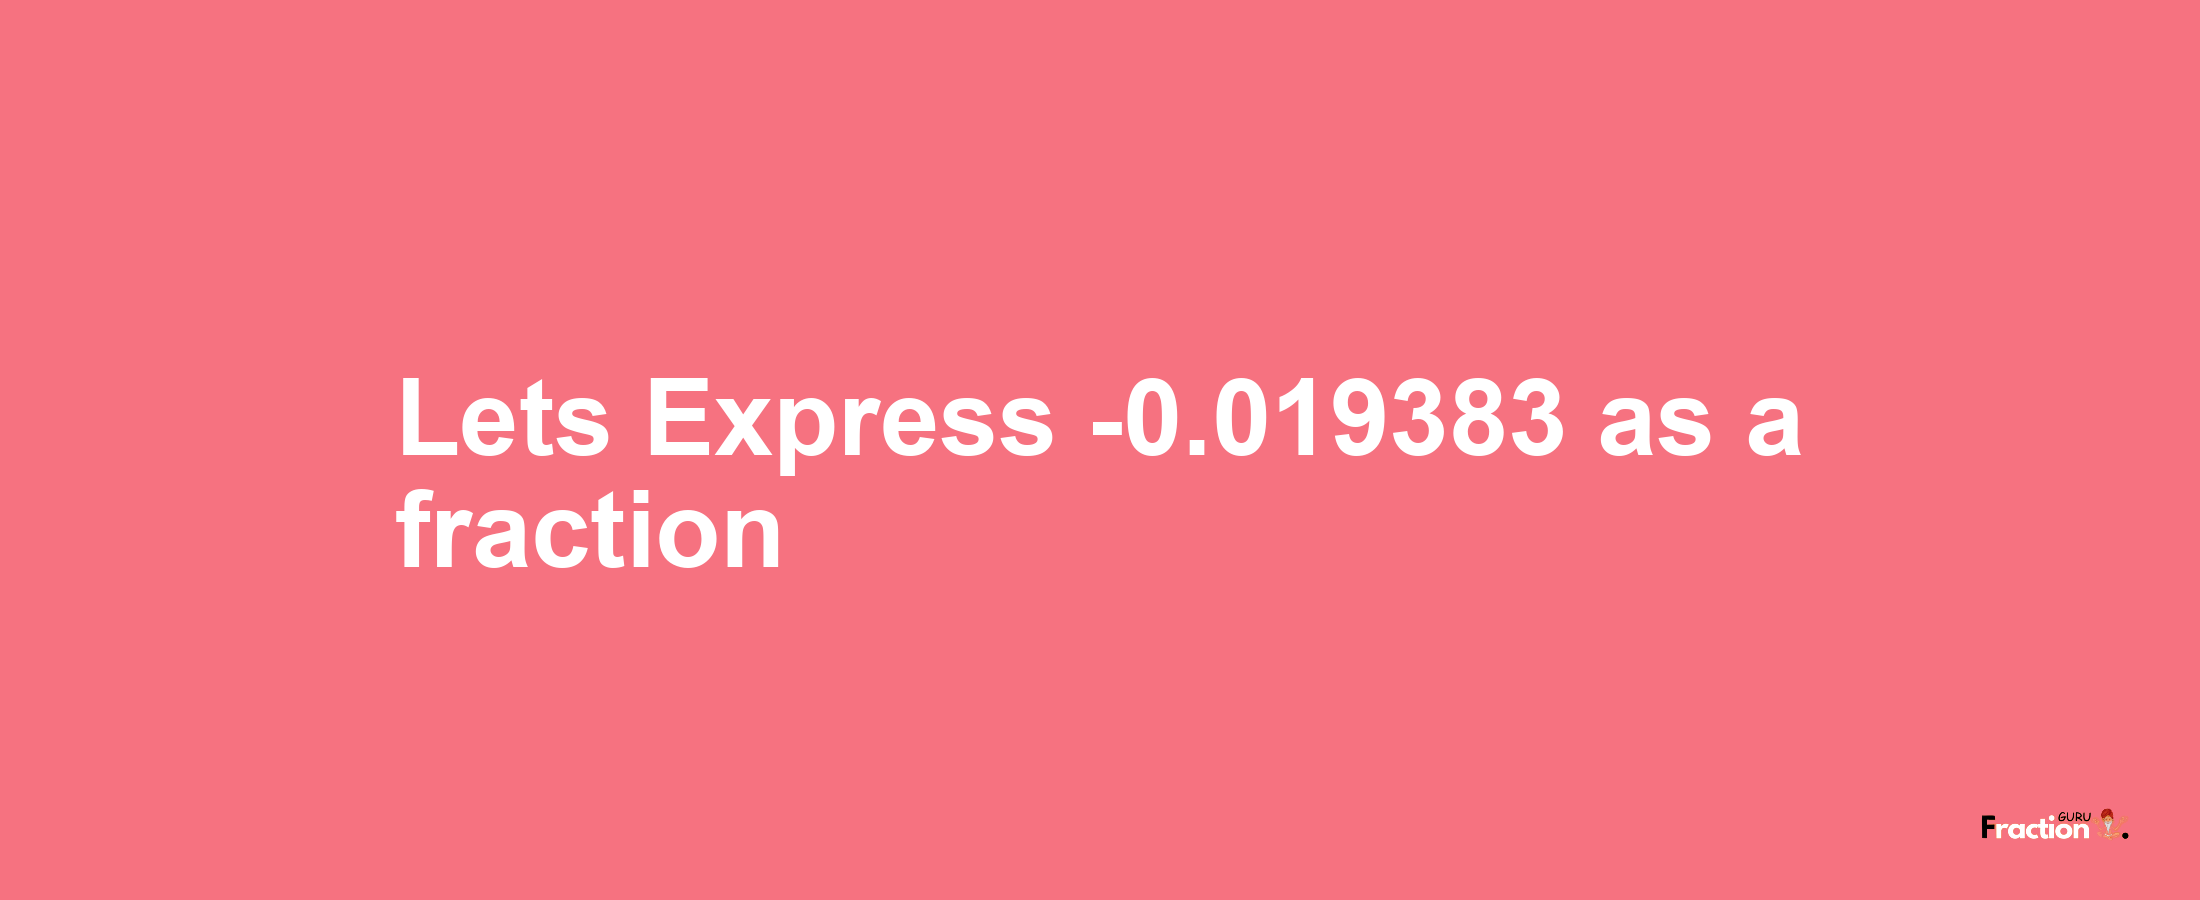 Lets Express -0.019383 as afraction